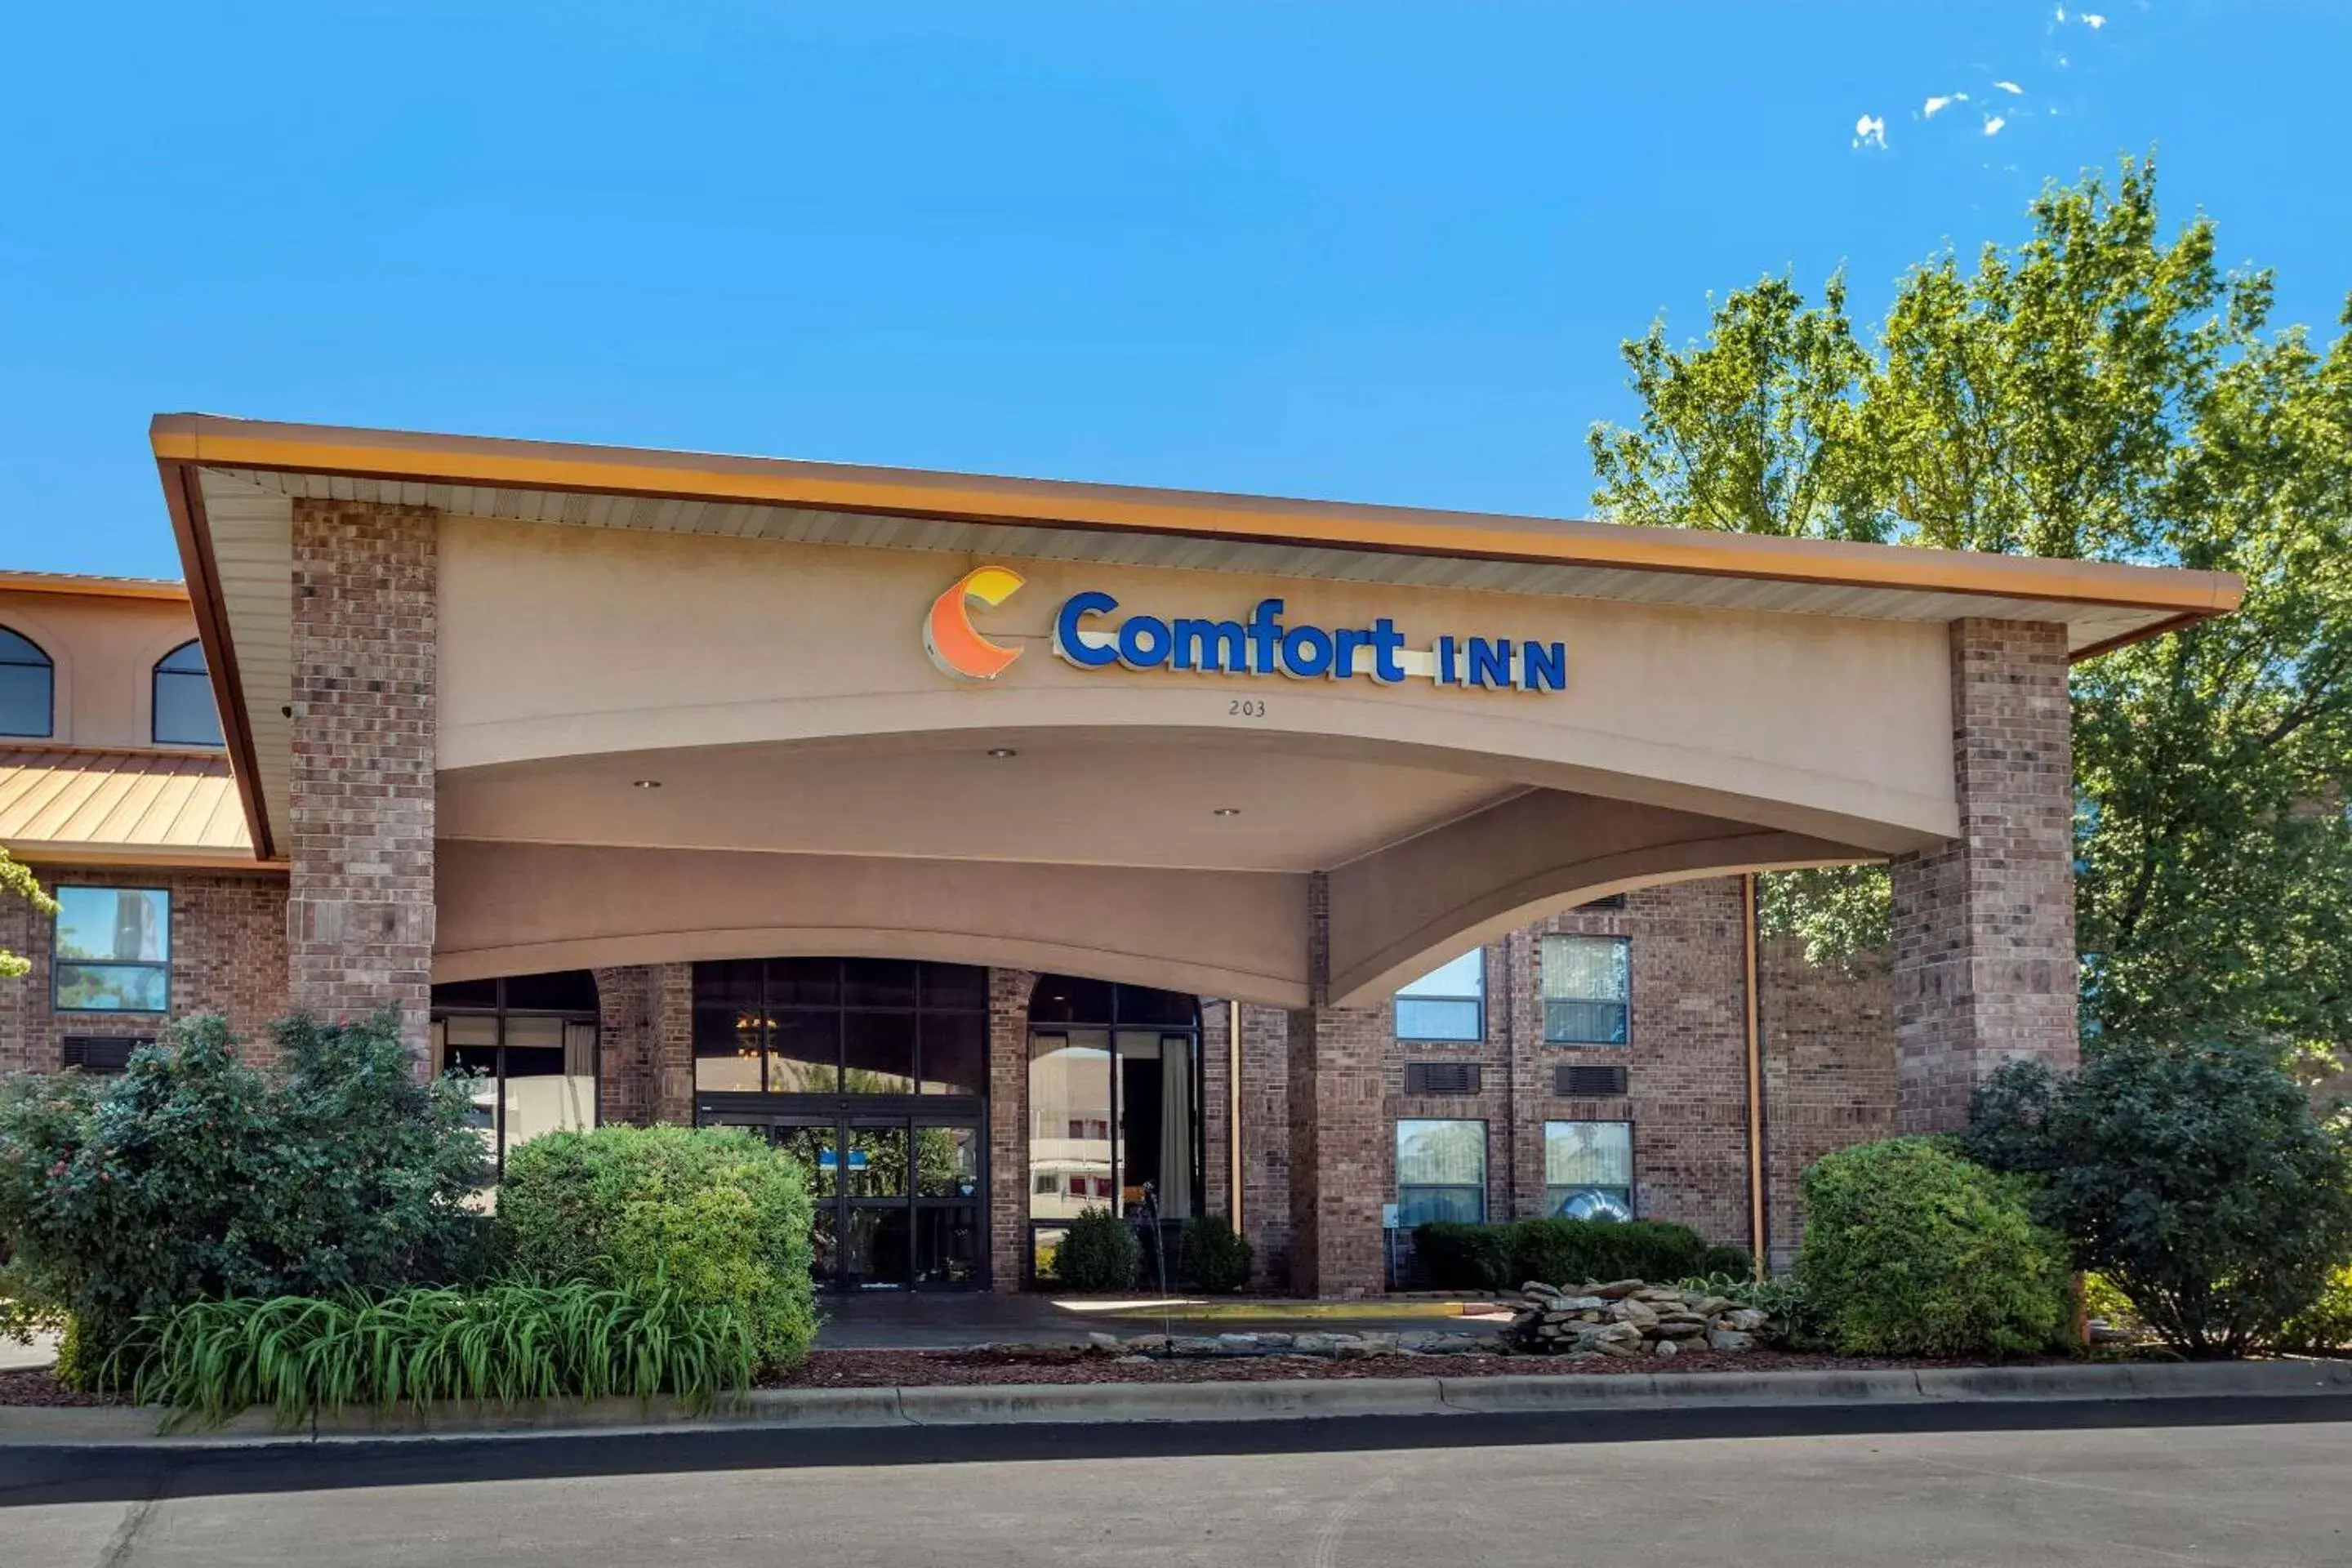 Property building in Comfort Inn at Thousand Hills